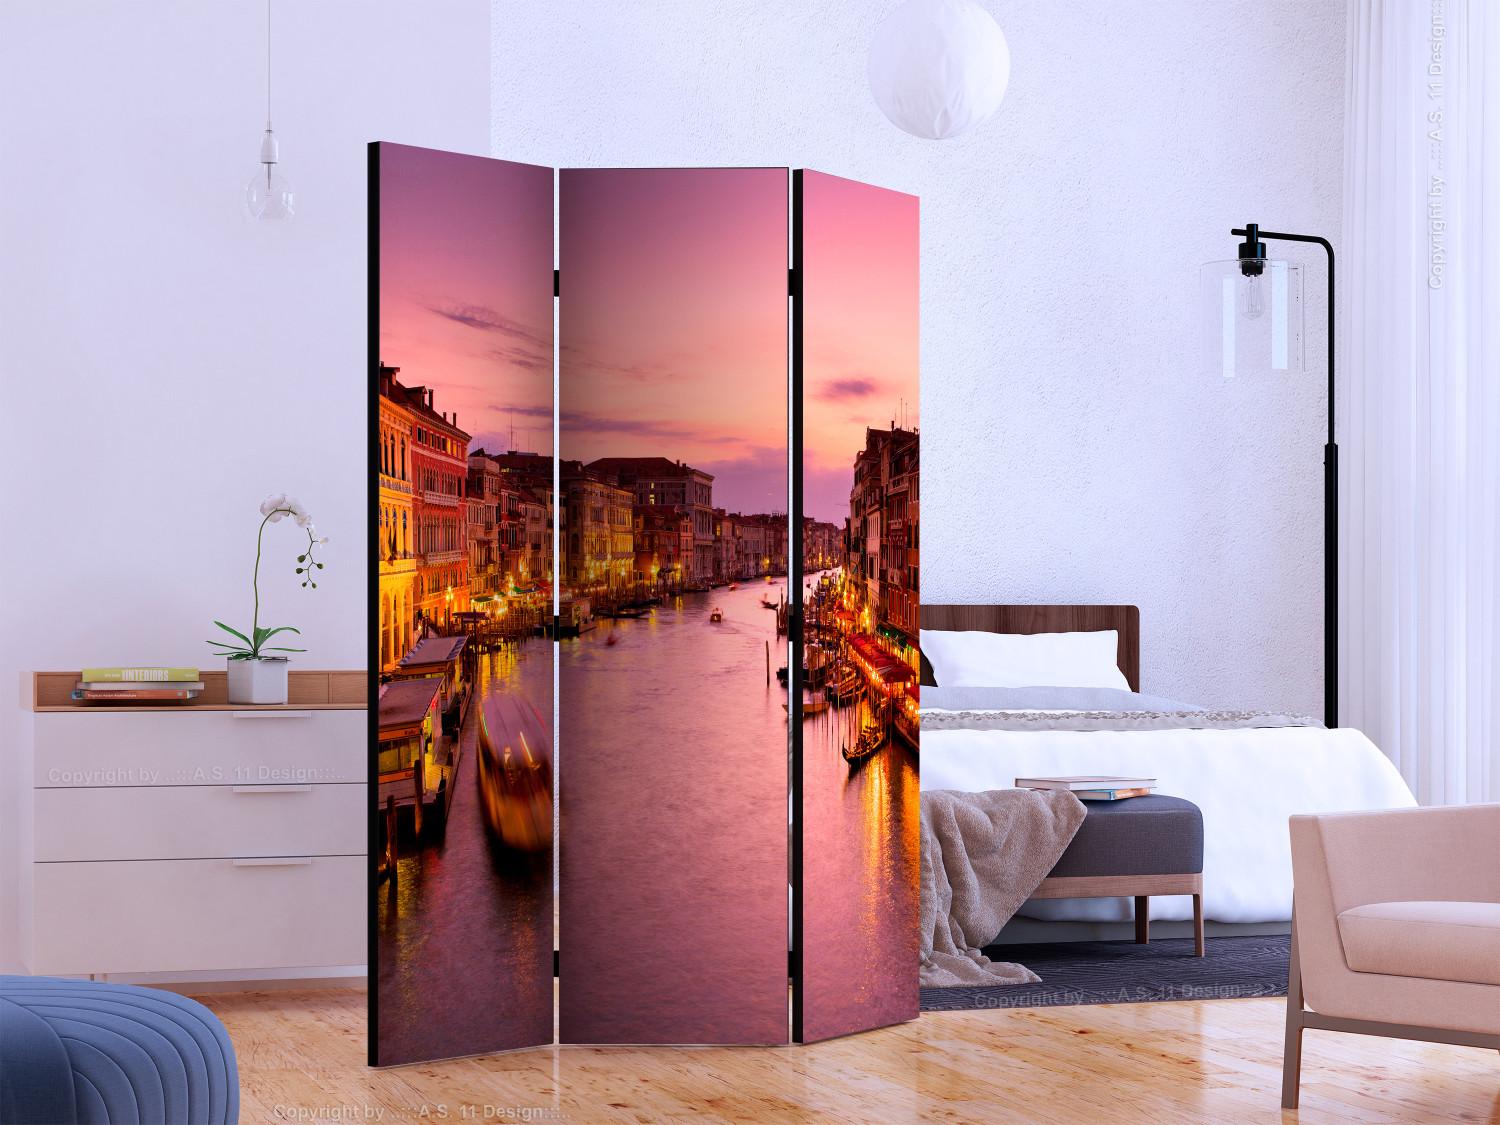 Biombo City of lovers, Venice by night [Room Dividers]